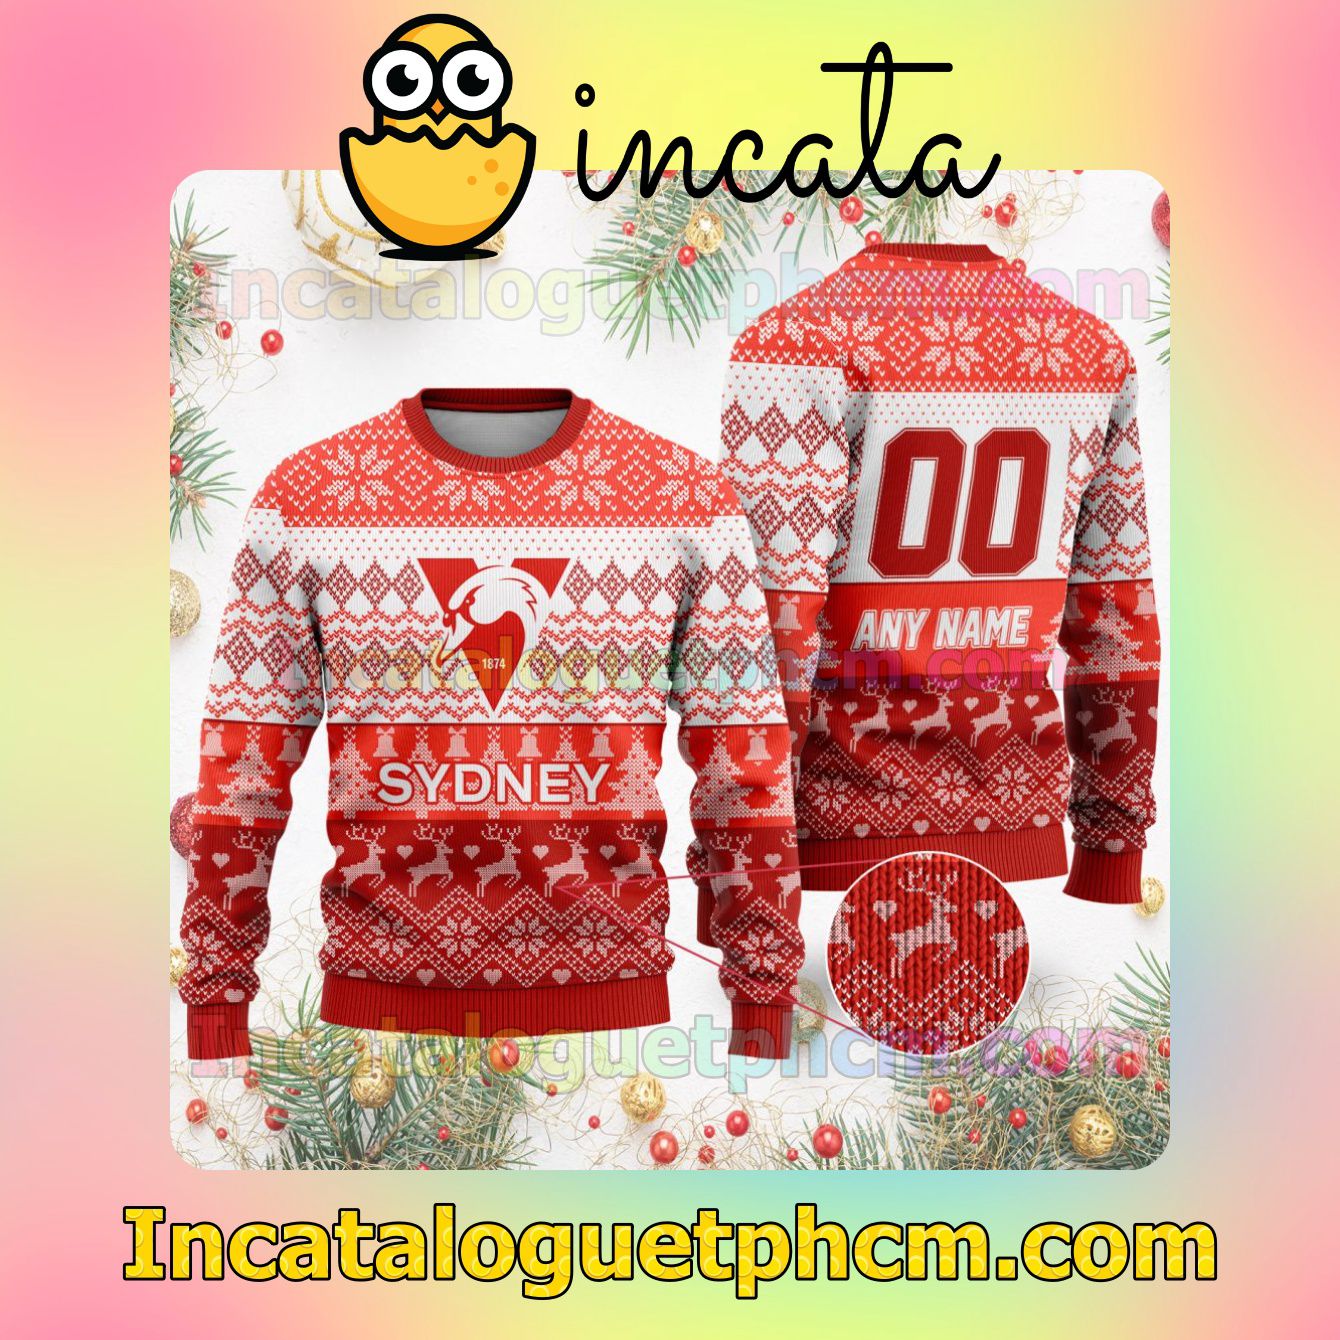 Gorgeous AFL Sydney Swans Ugly Christmas Jumper Sweater